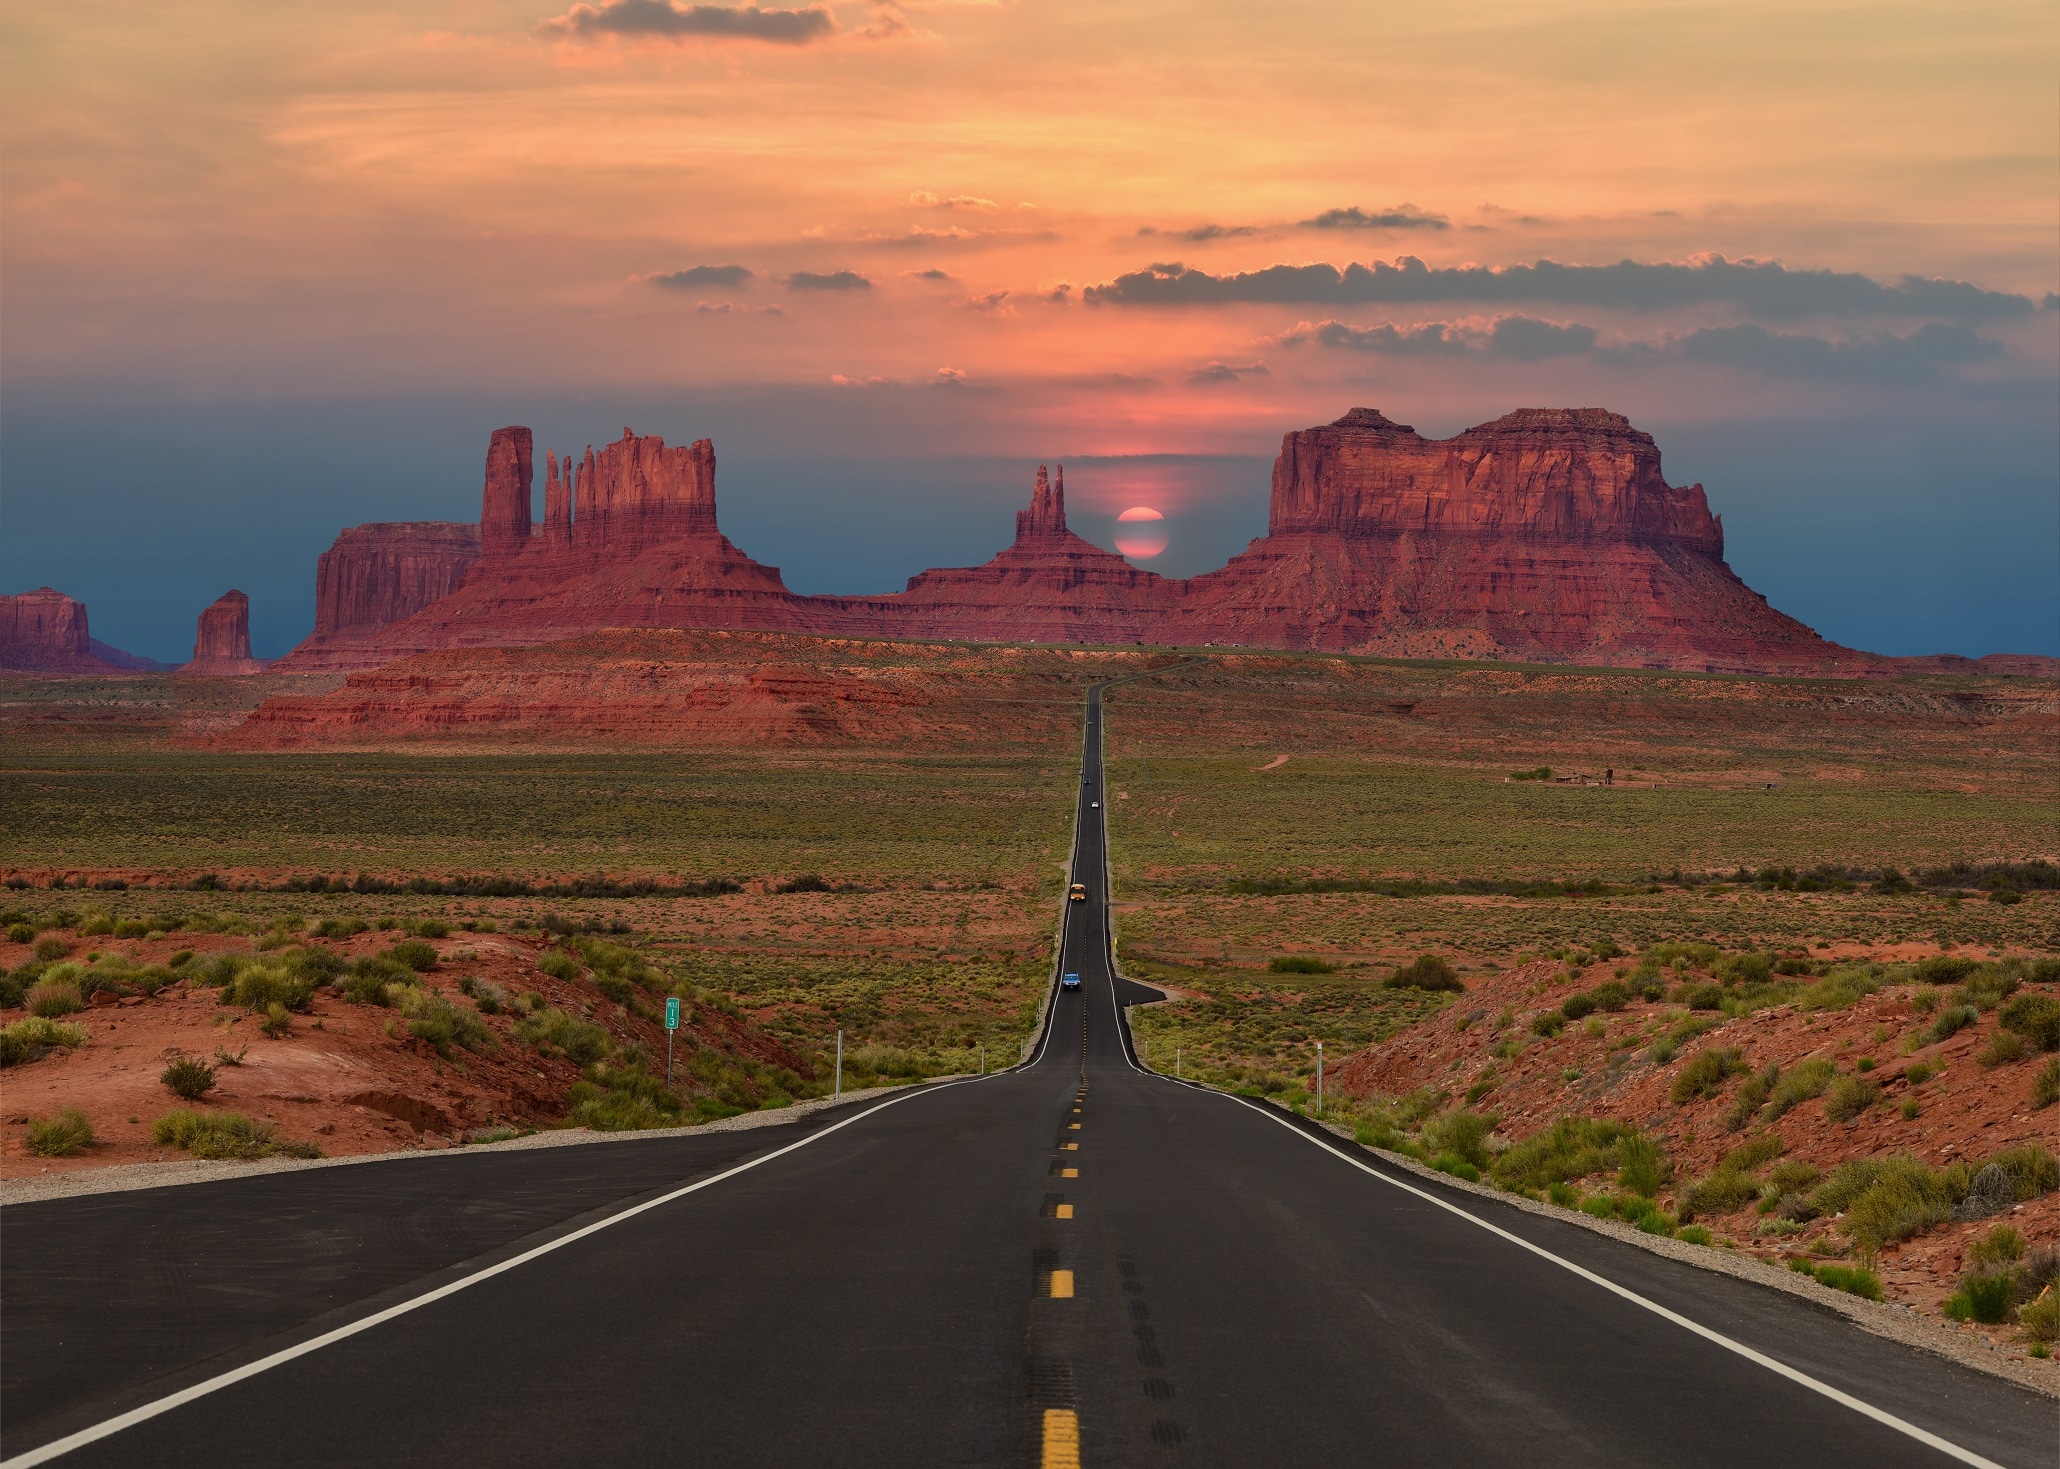 Shutterstock 1117074449 Scenic Highway In Monument Valley Tribal Park In Arizona Utah Border U.S.A. At Sunset